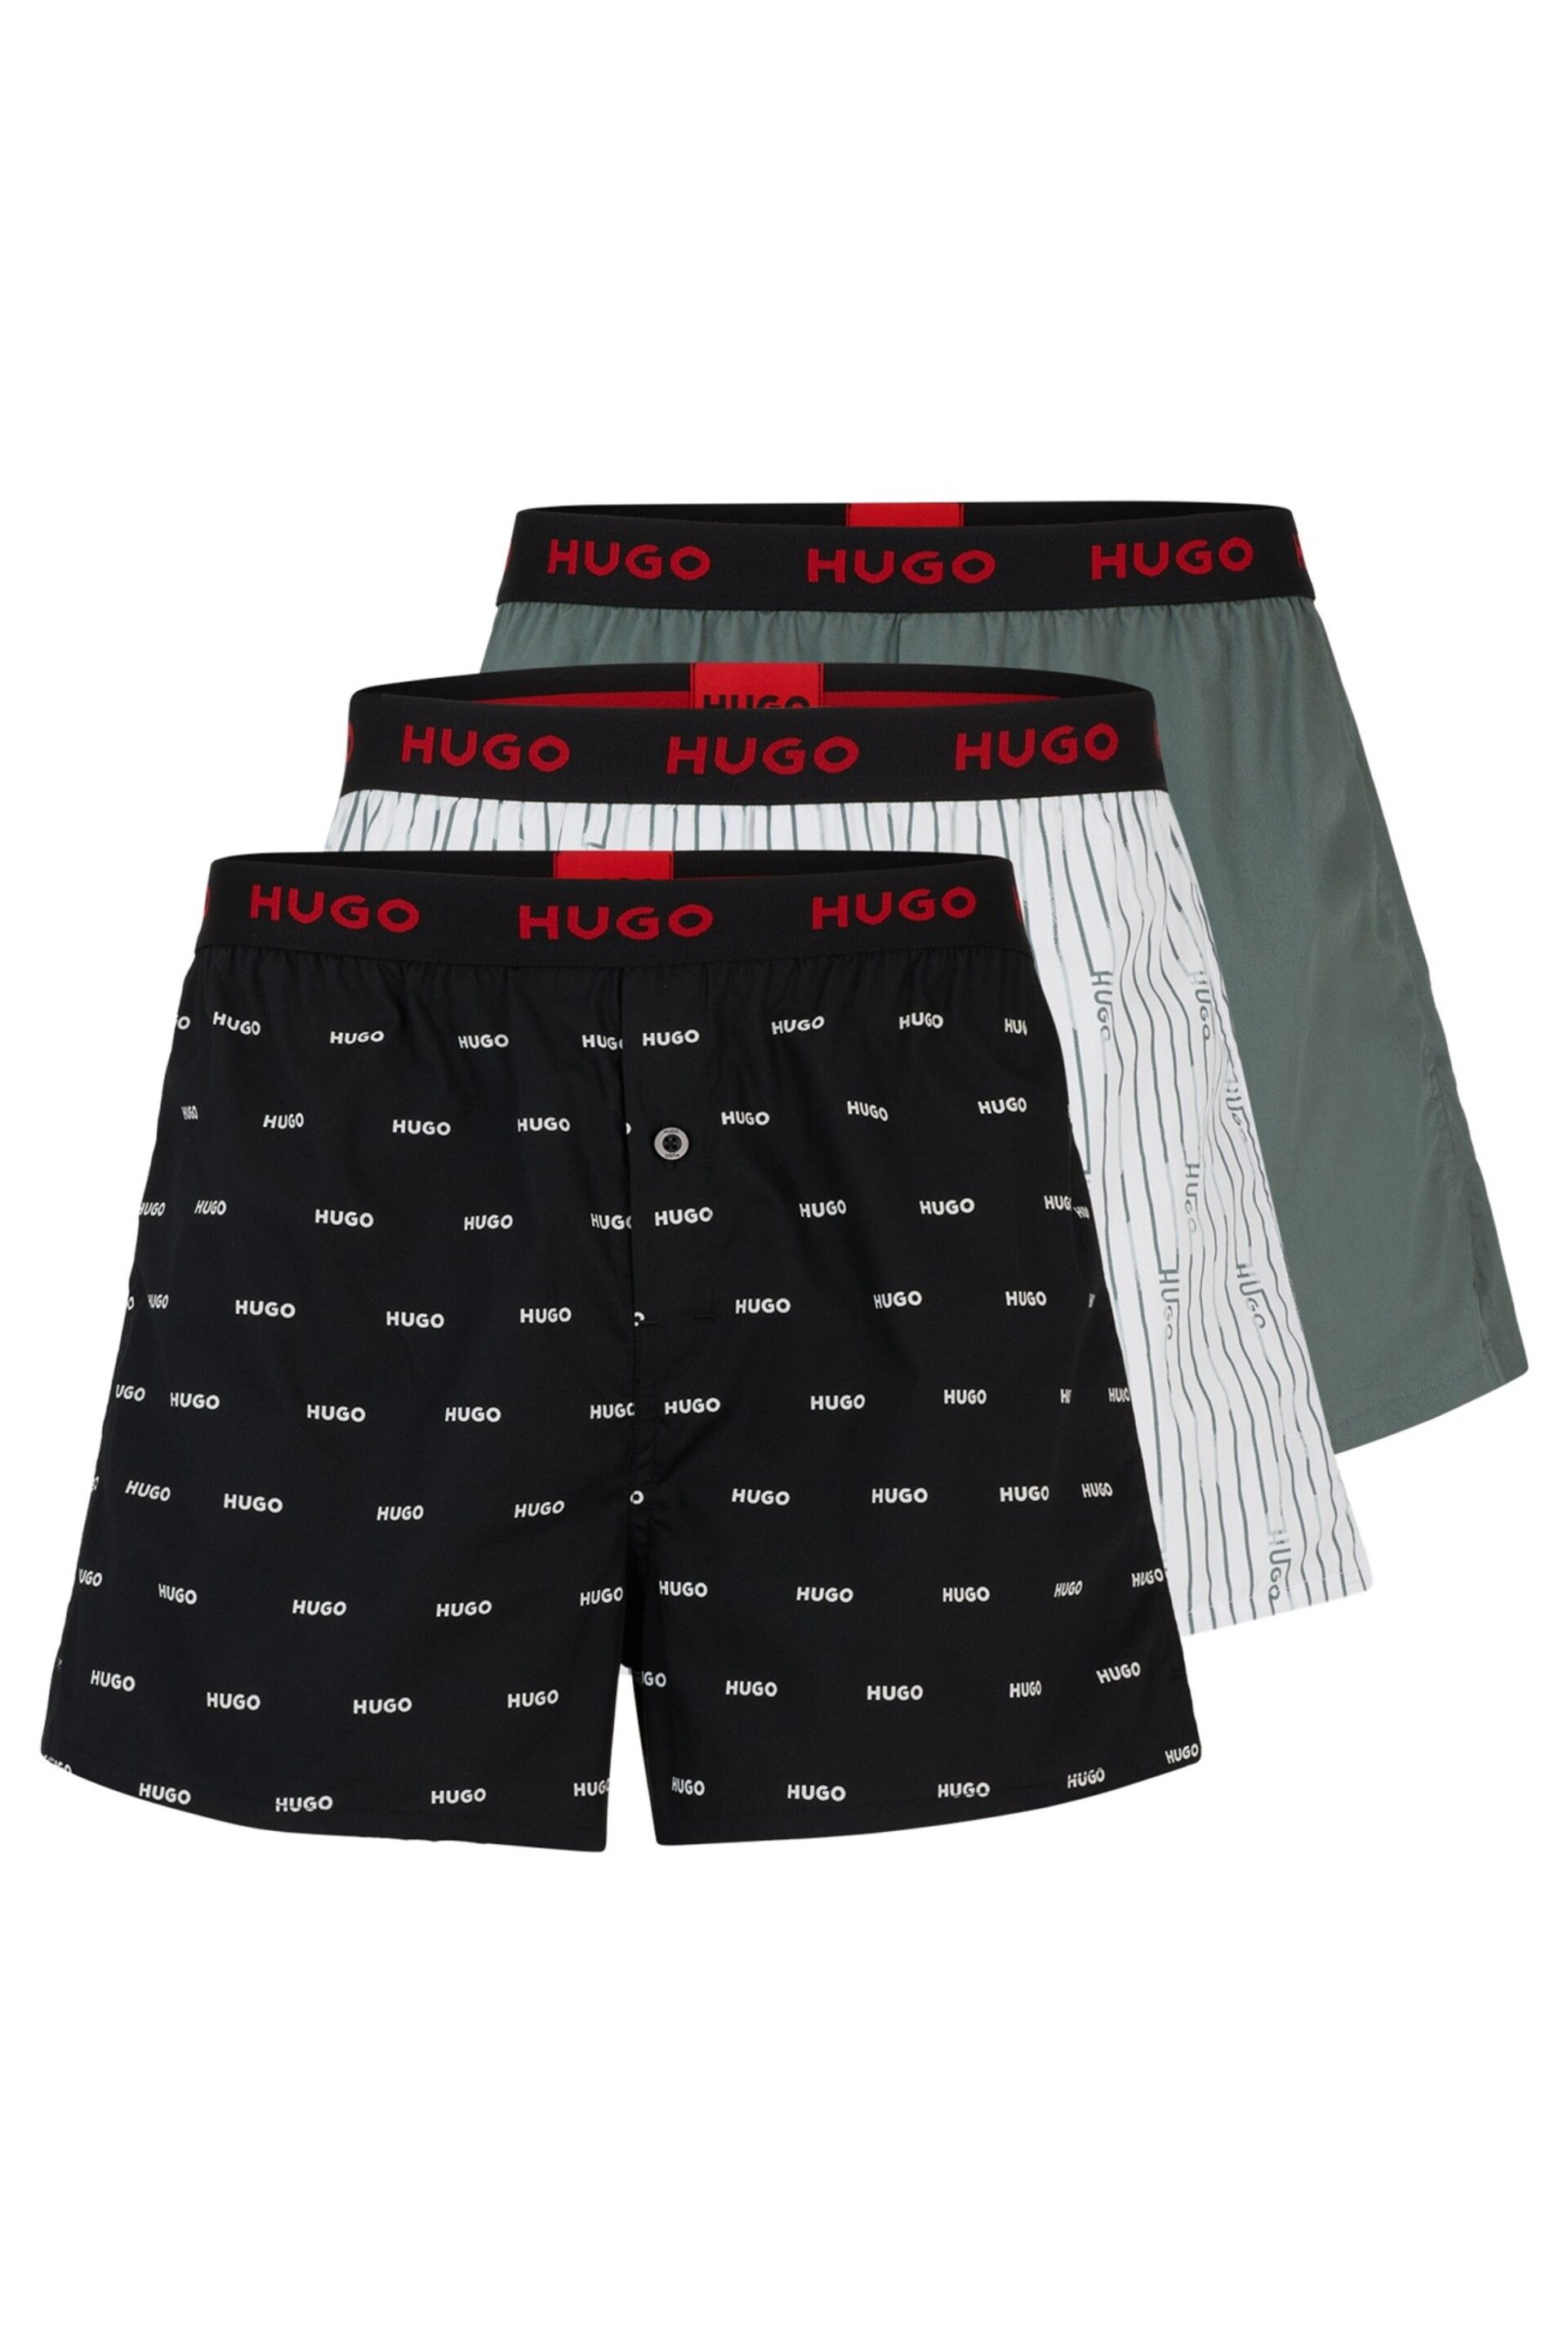 HUGO Green Cotton Boxers Shorts With Logo Waistbands 3 Pack - Image 1 of 6